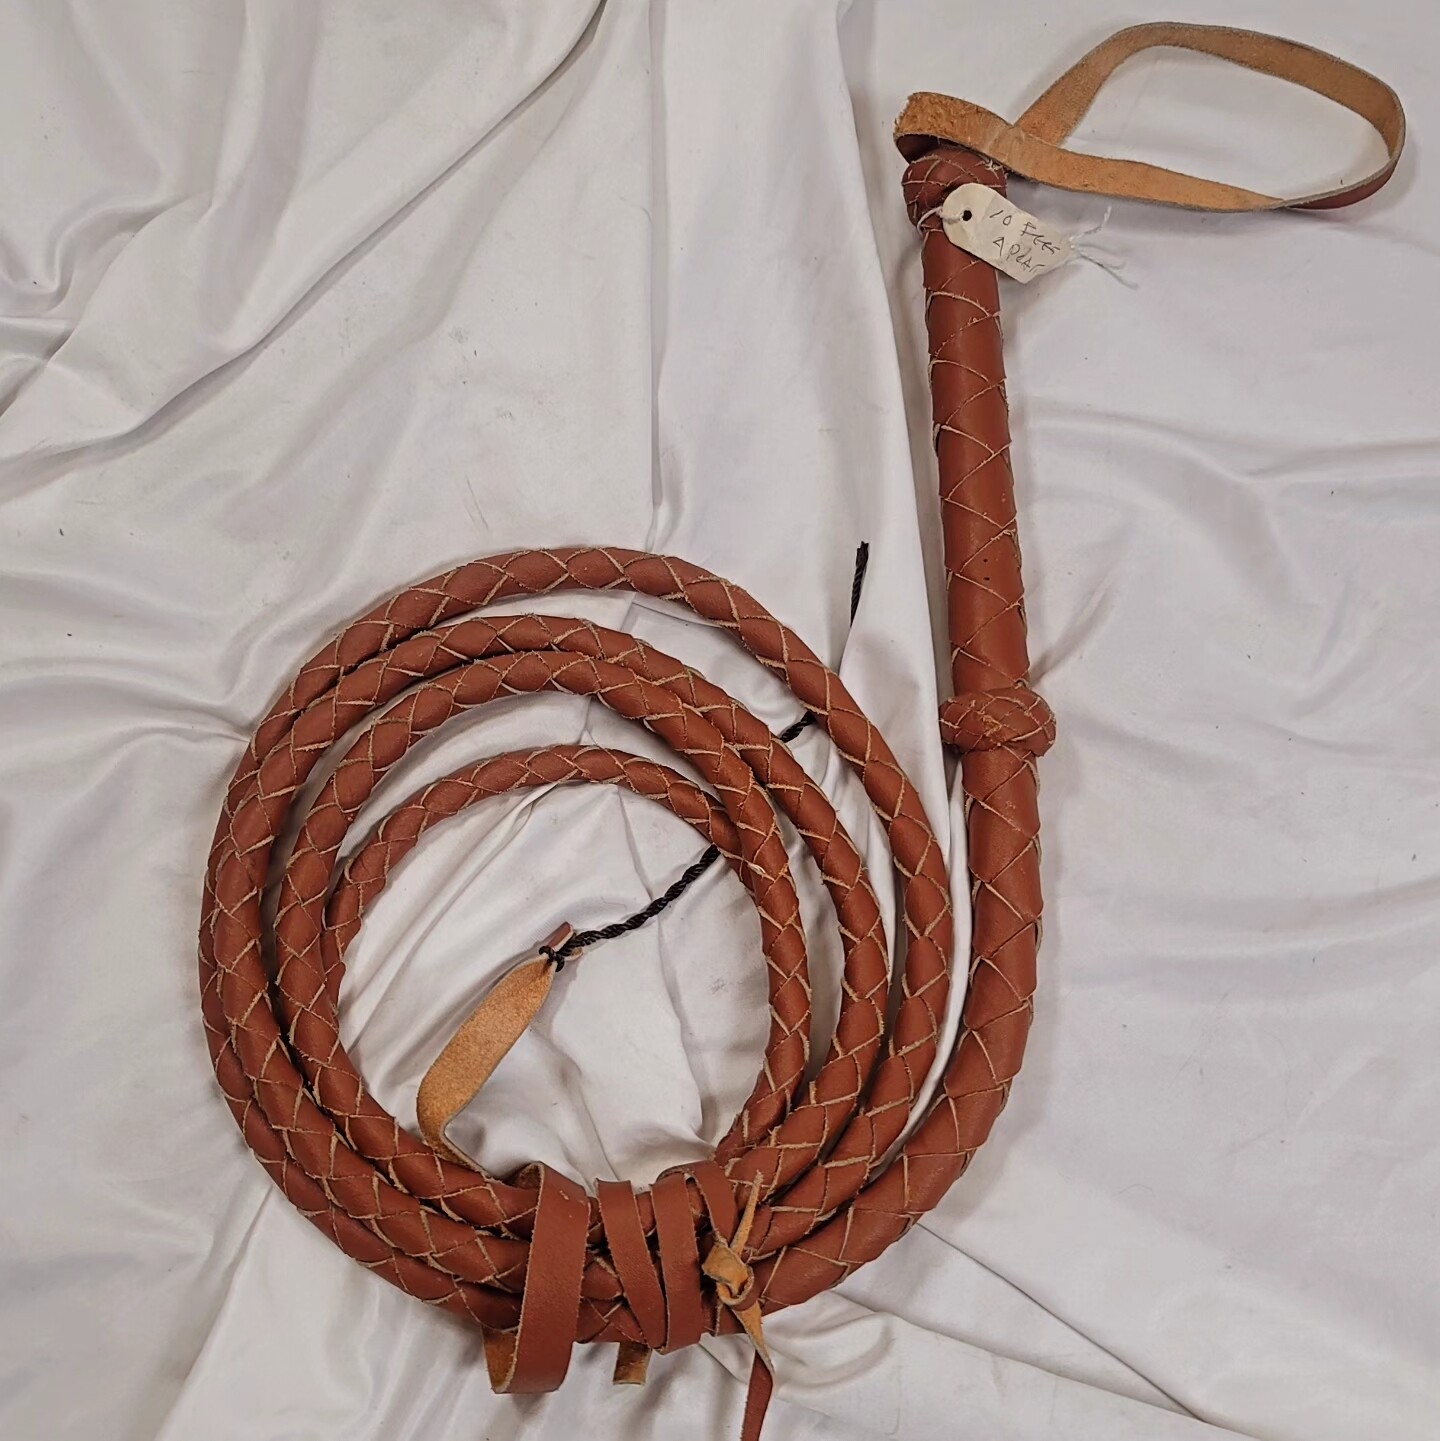 New 10 footnhand braided leather whip